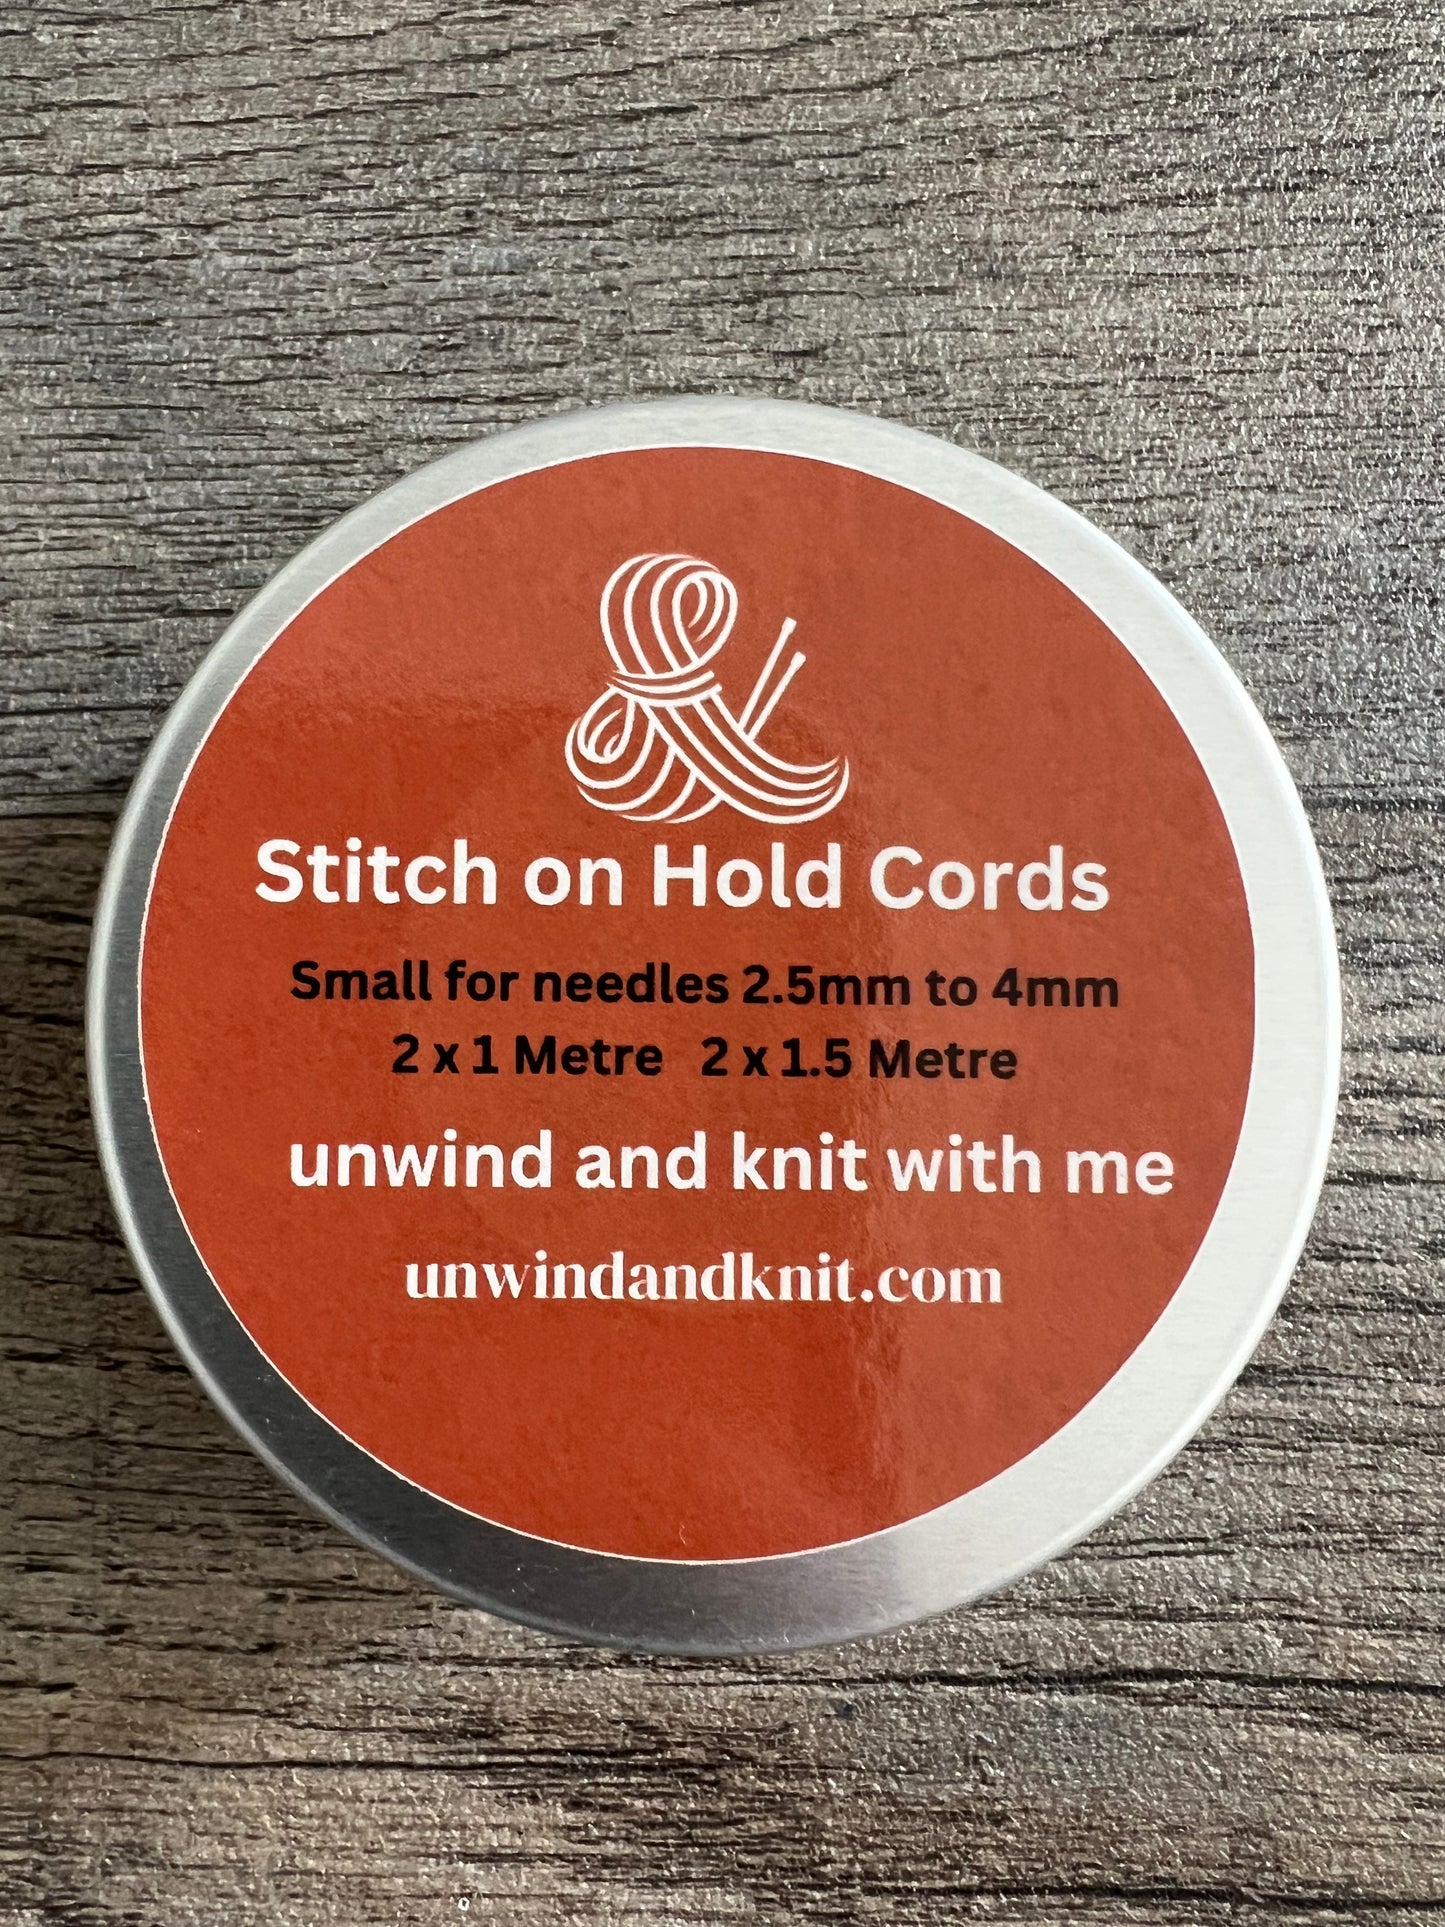 Knitting Cords - Stitch on Hold Cords